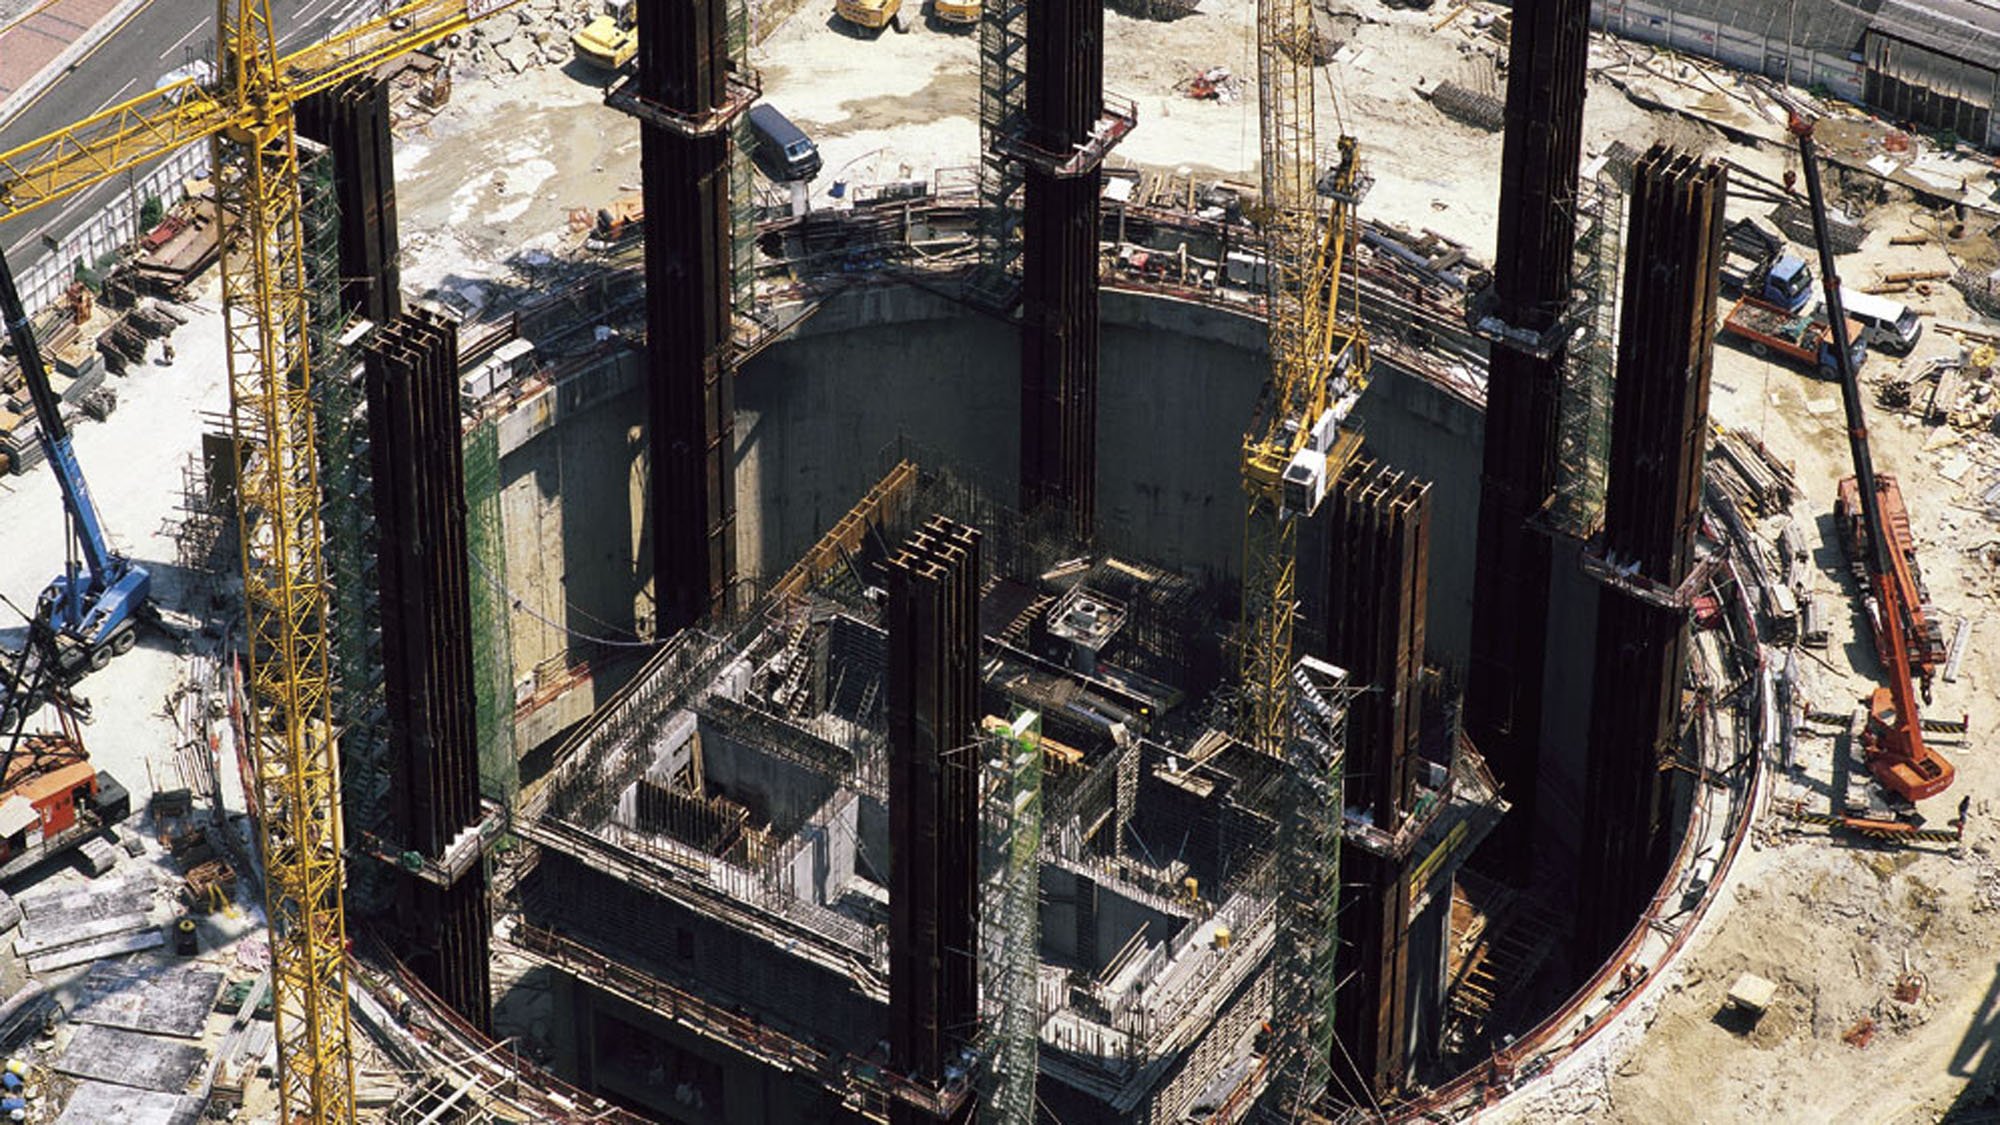 The 61m-diameter cofferdam's foundation base for the mega tower.